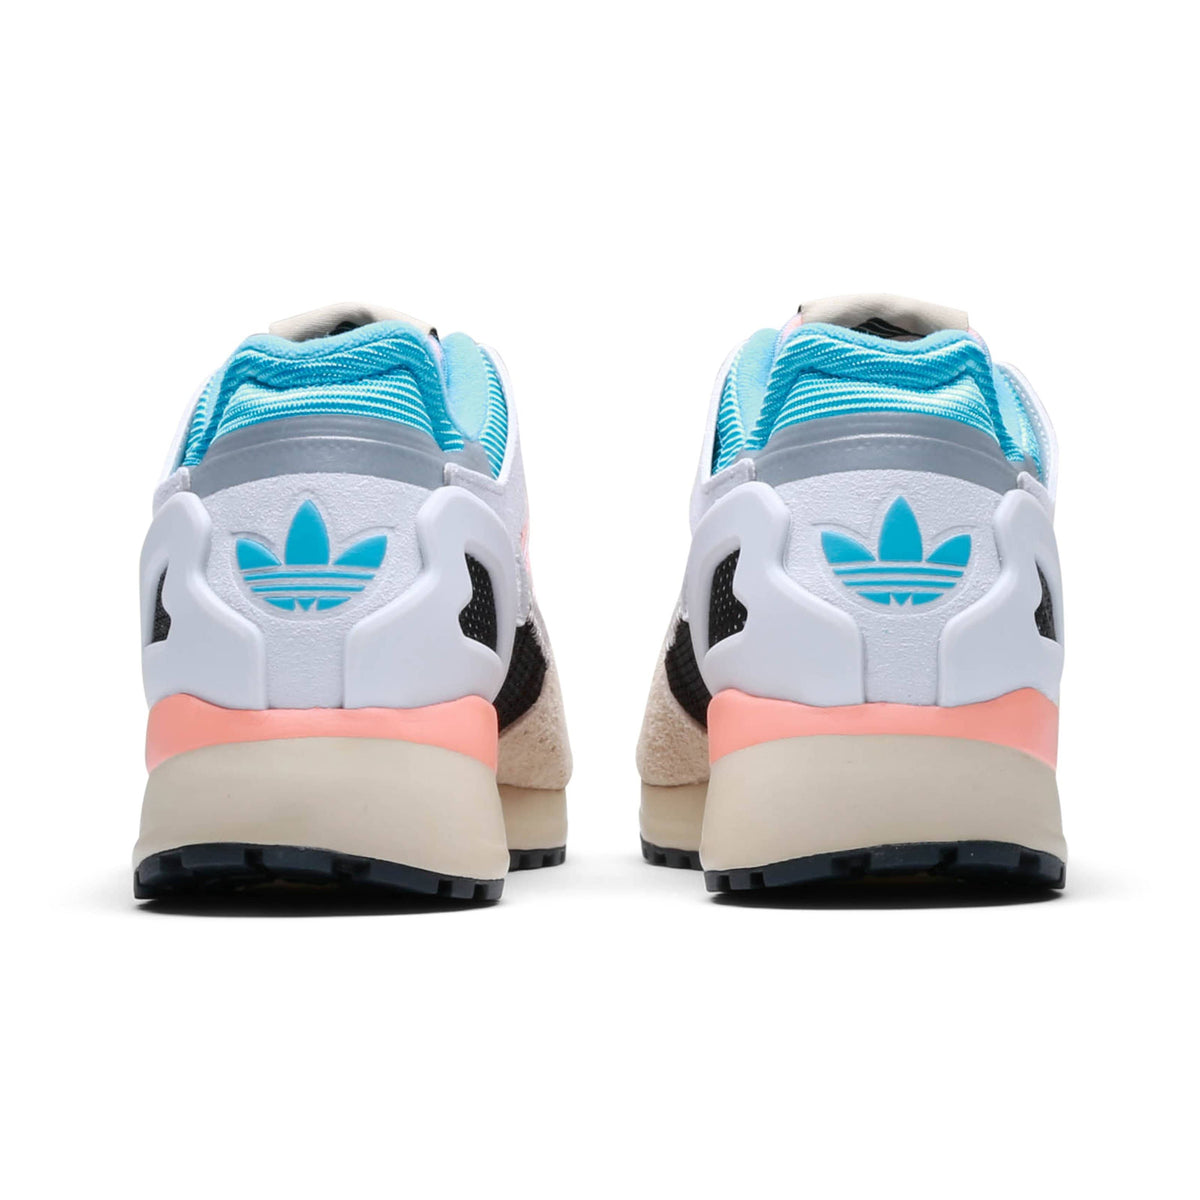 adidas shoes under 10000